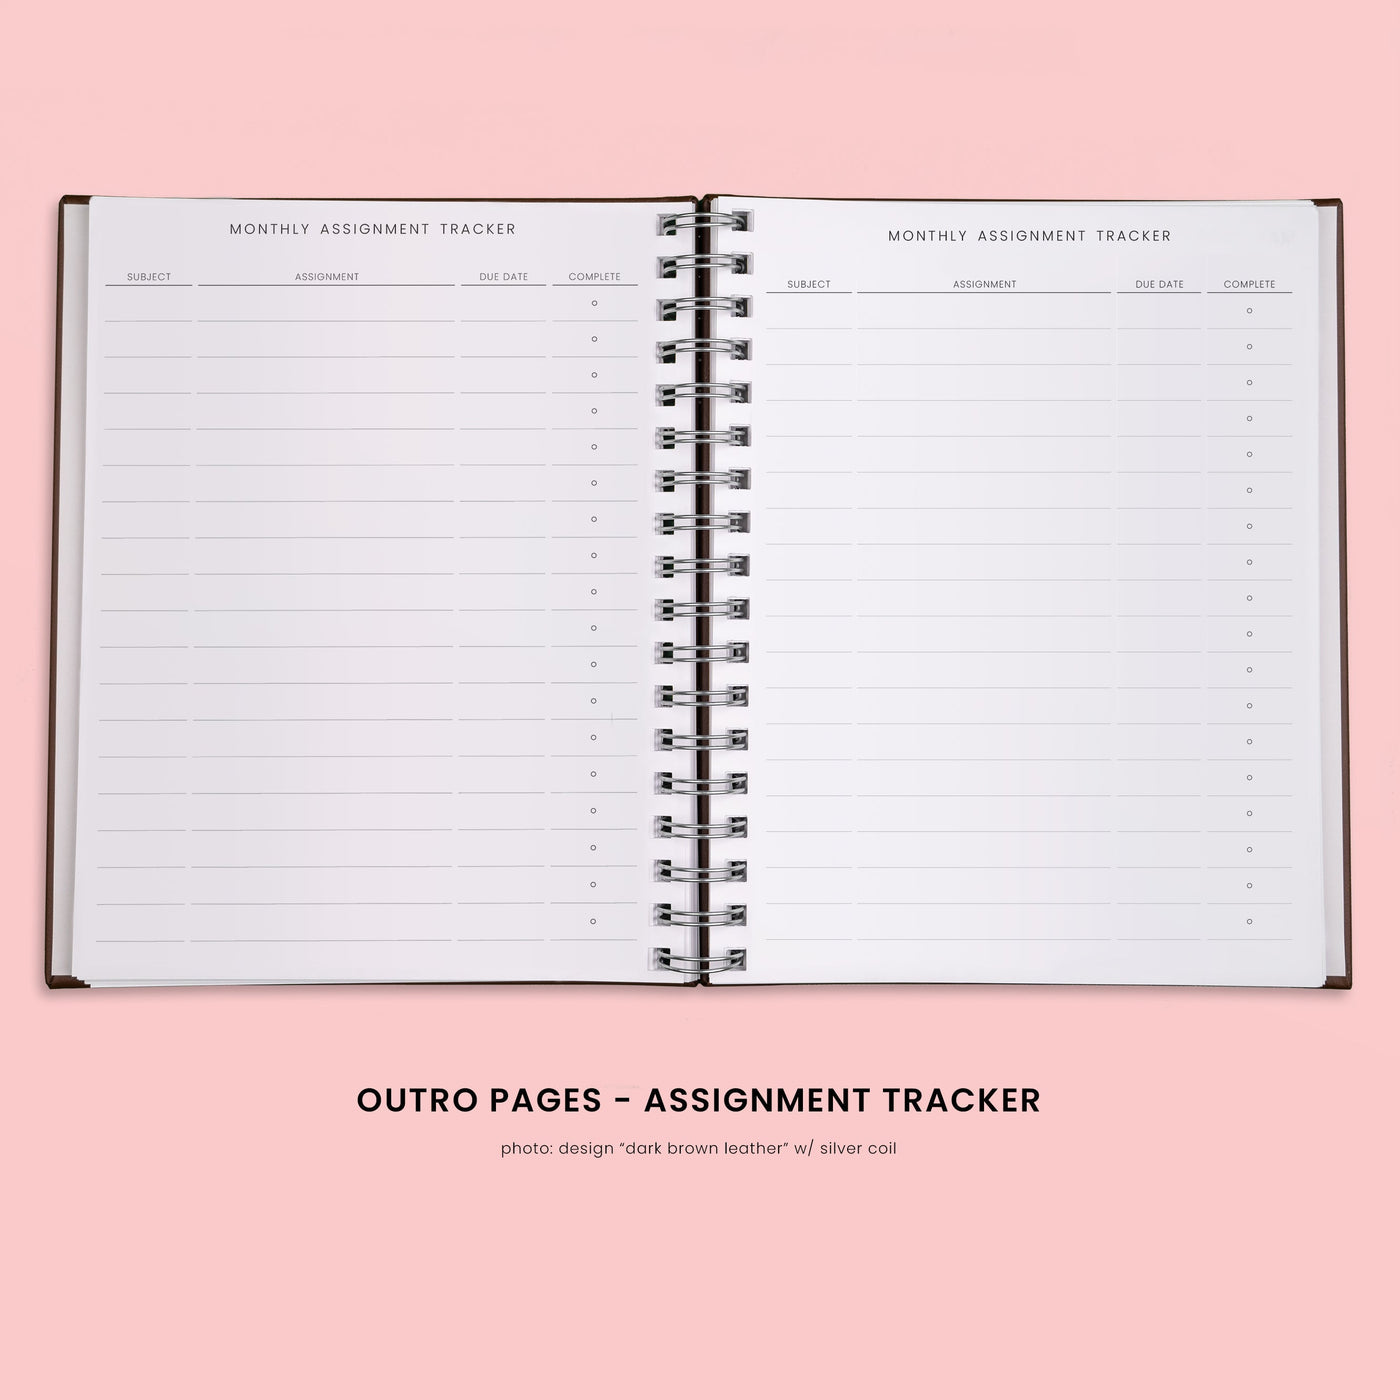 Student Planner - Natural